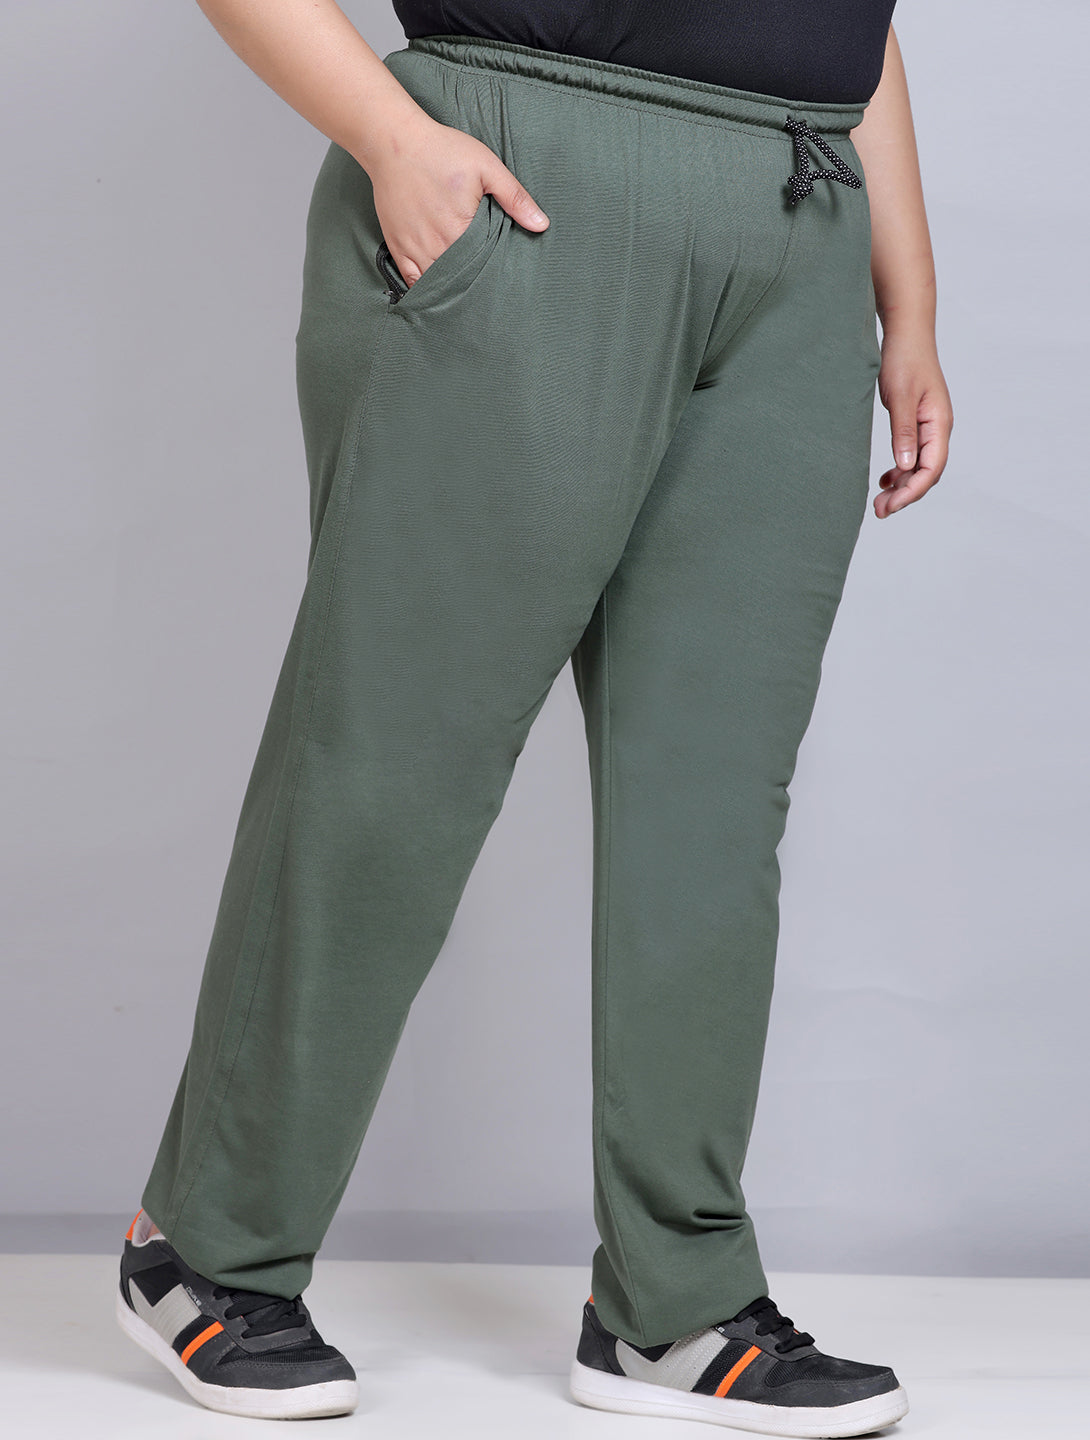 Comfy Green Cotton Track Pants For Women At Best Prices